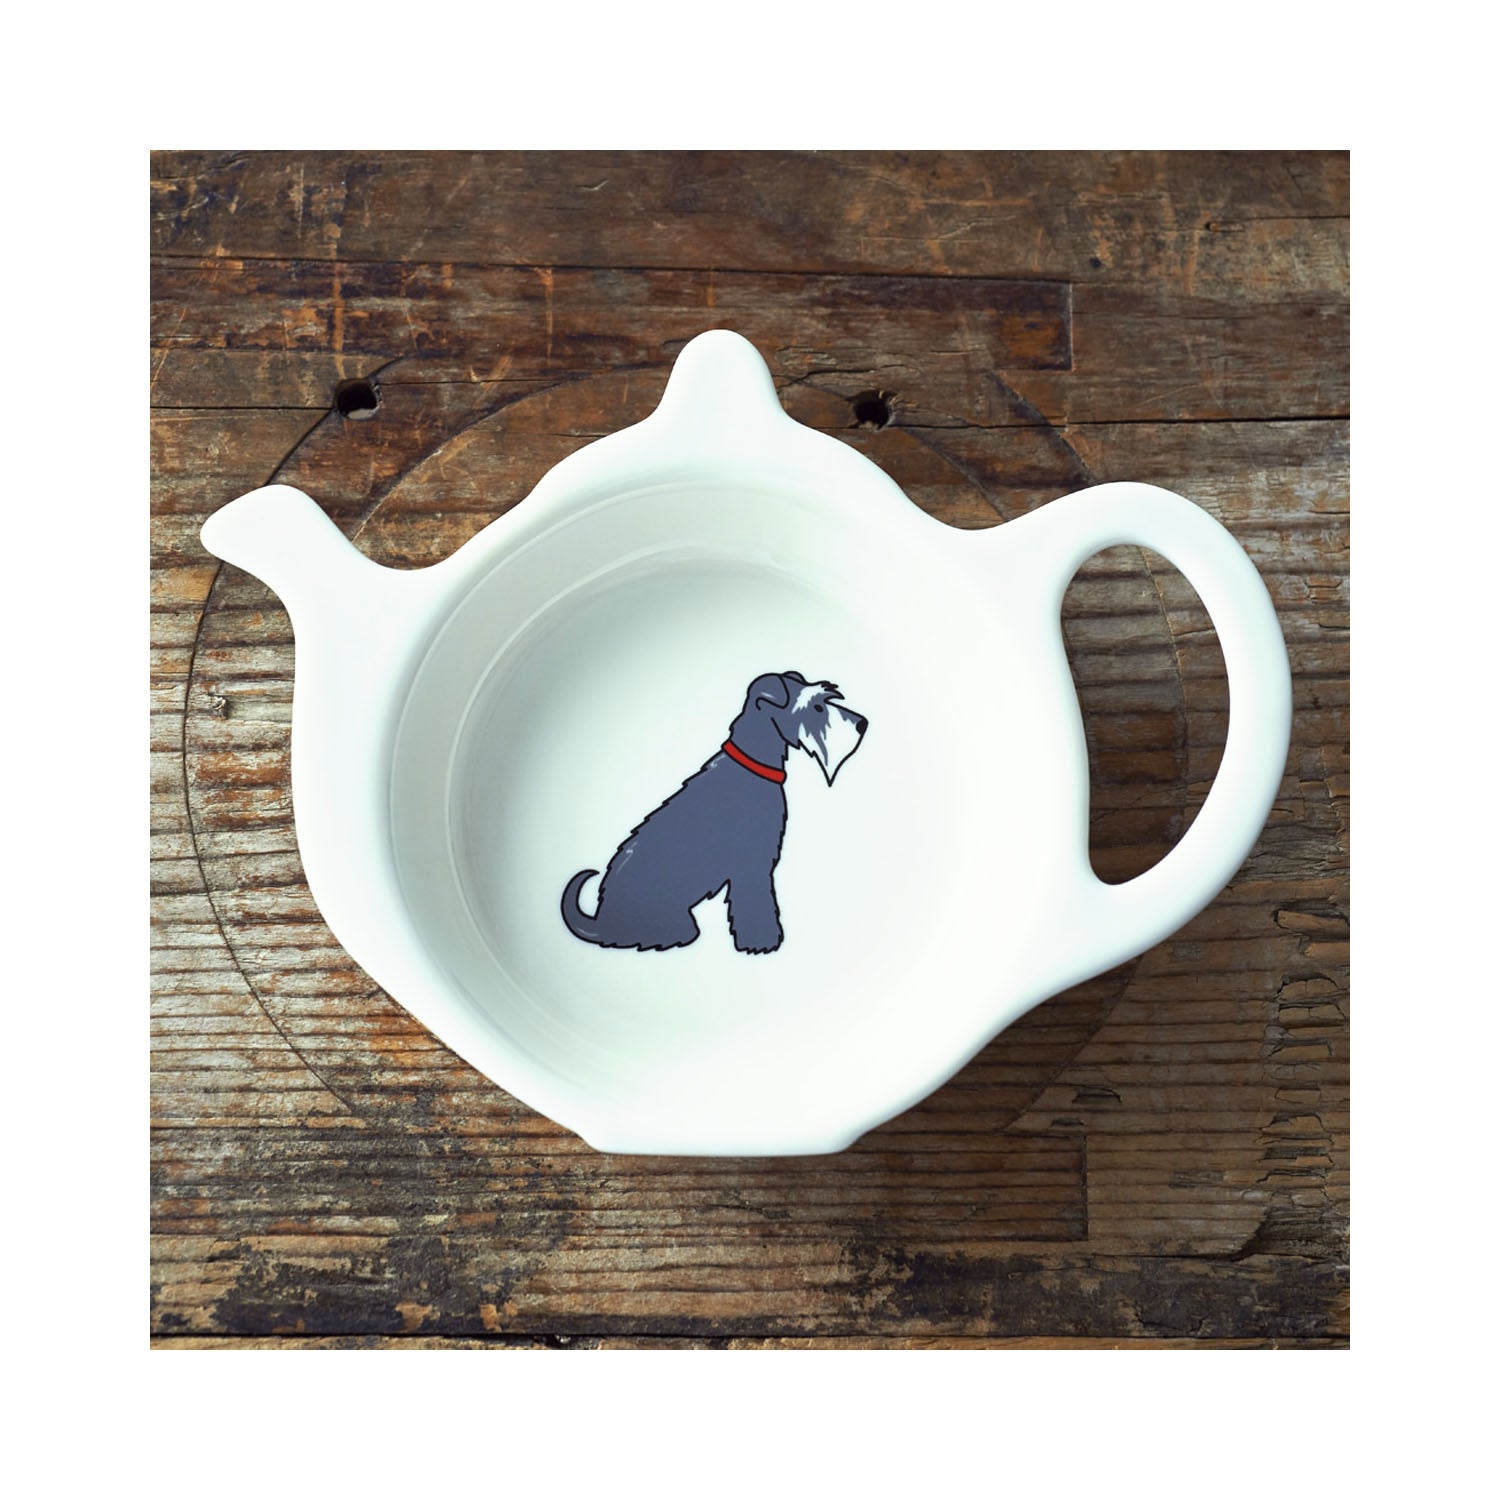 Dog Lover Gifts available at Dog Krazy Gifts - Eddie The Grey & White Schnauzer Teabag Dish - part of the Sweet William range available from Dog Krazy Gifts